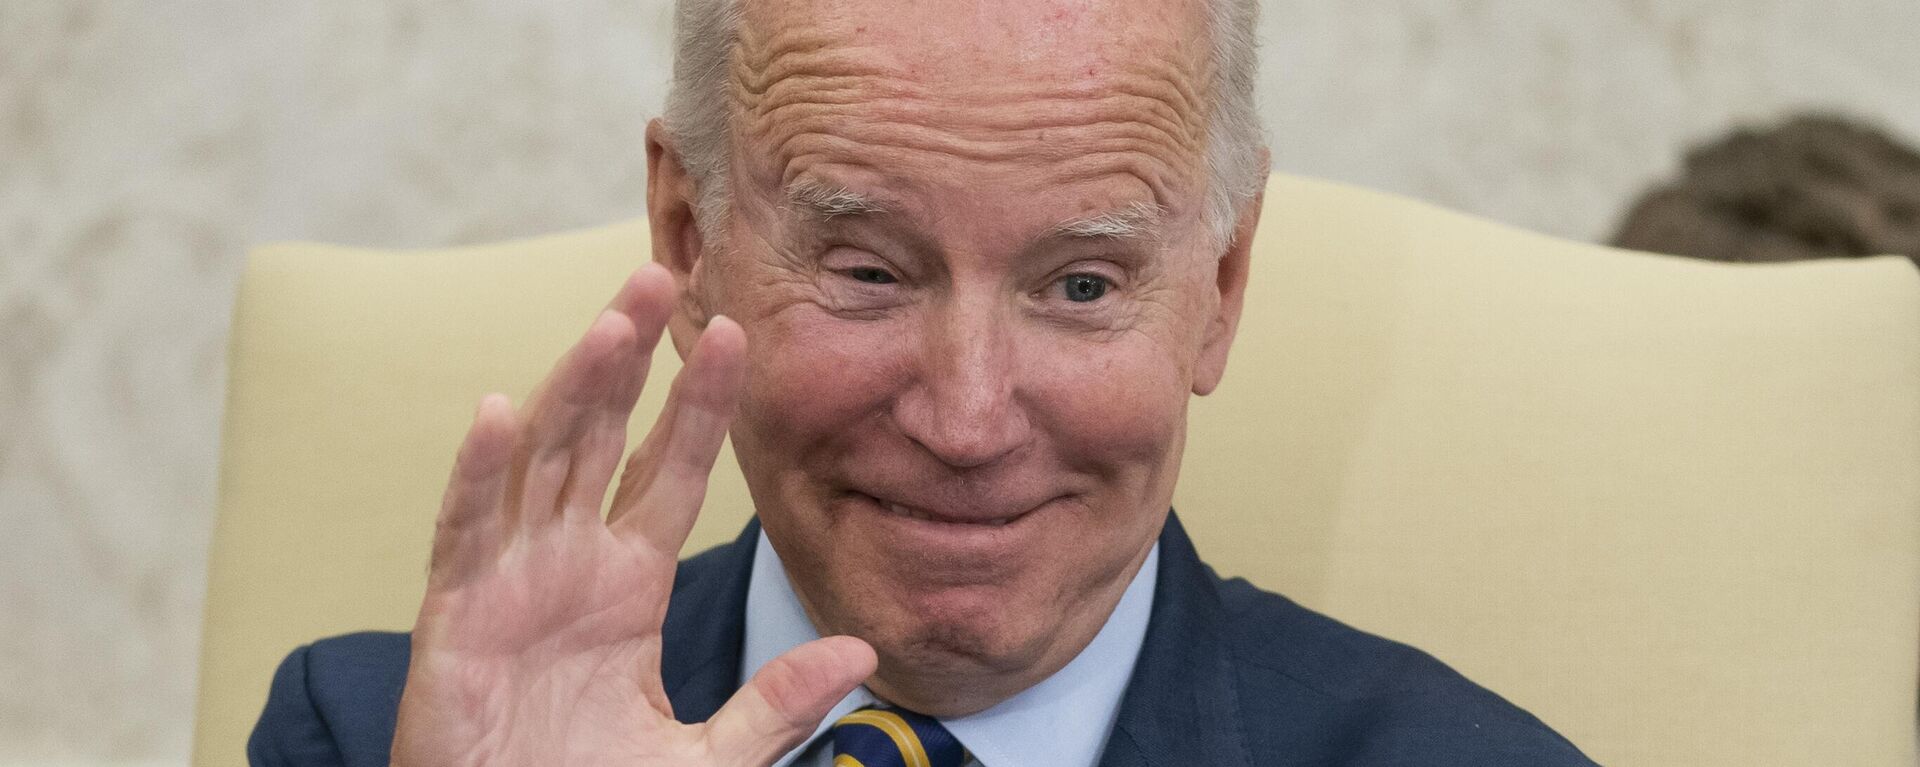 President Joe Biden waves during a meeting with South African President Cyril Ramaphosa in the Oval Office of the White House, Friday, Sept. 16, 2022, in Washington.  - Sputnik International, 1920, 26.03.2023